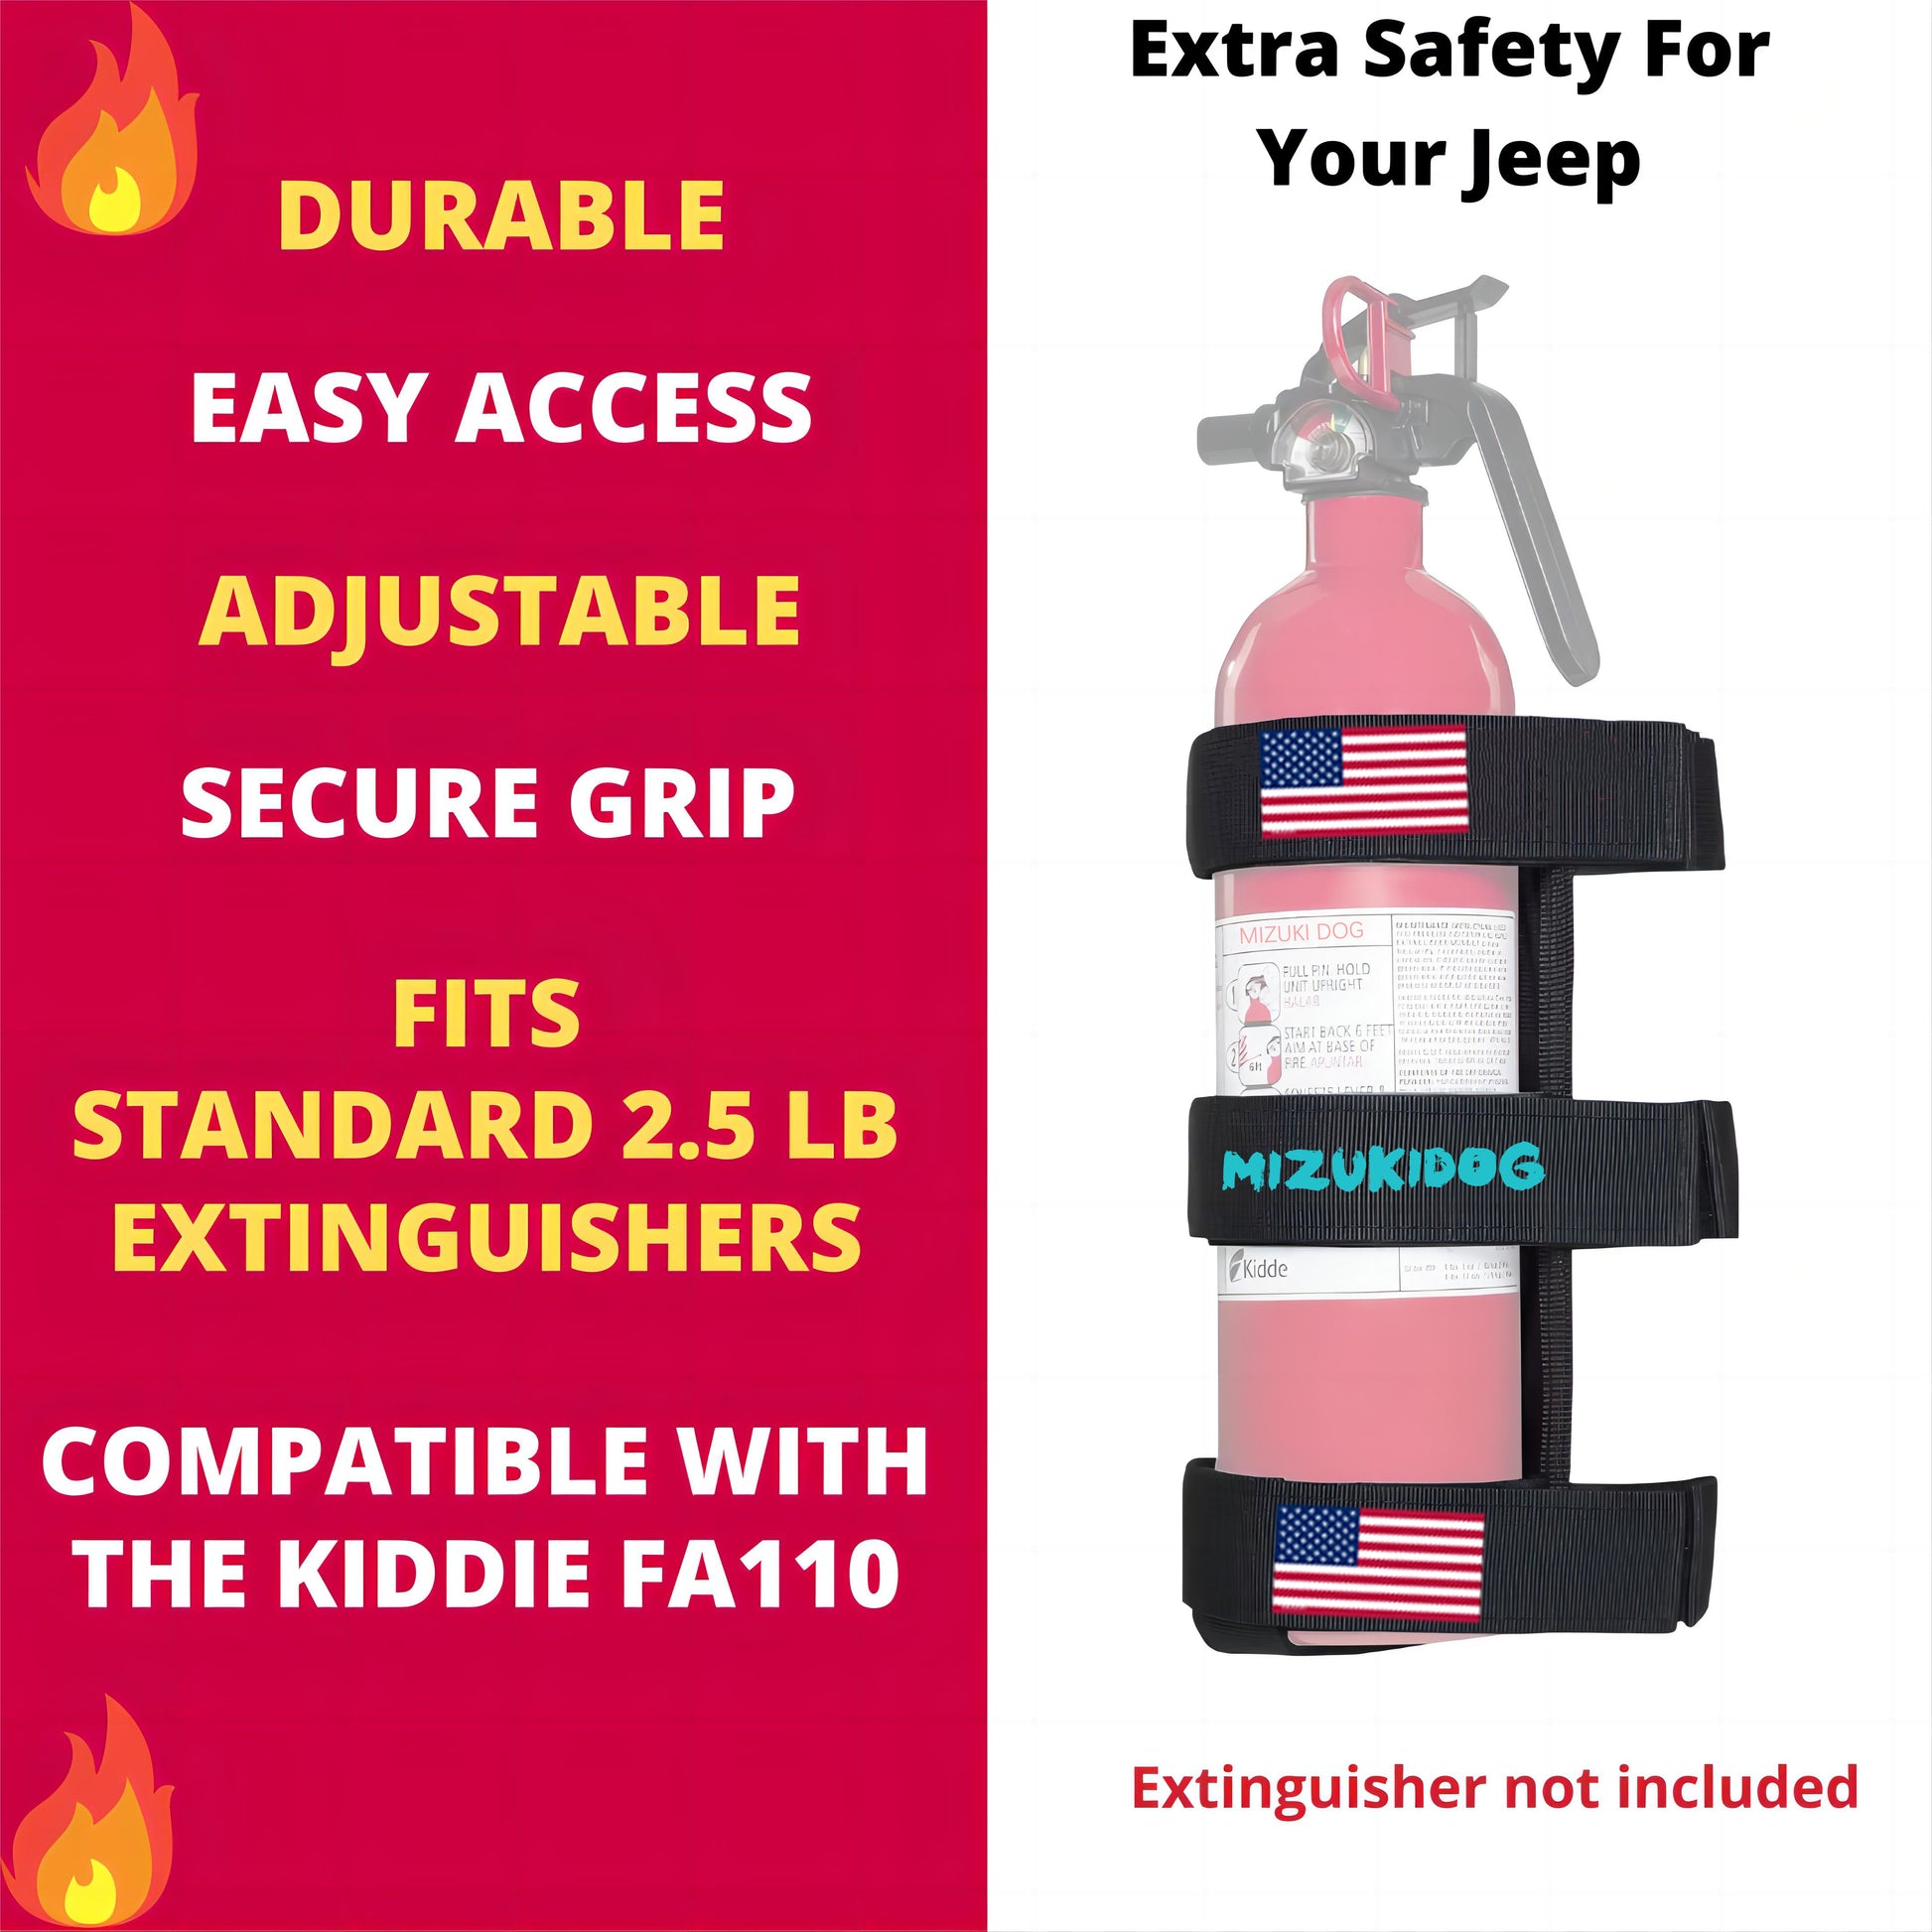 Fire Extinguisher with Mount - 4 in-1 Fire Extinguishers for The House,  Portable Car Fire Extinguisher, Water-Based Fire Extinguishers(620ml)